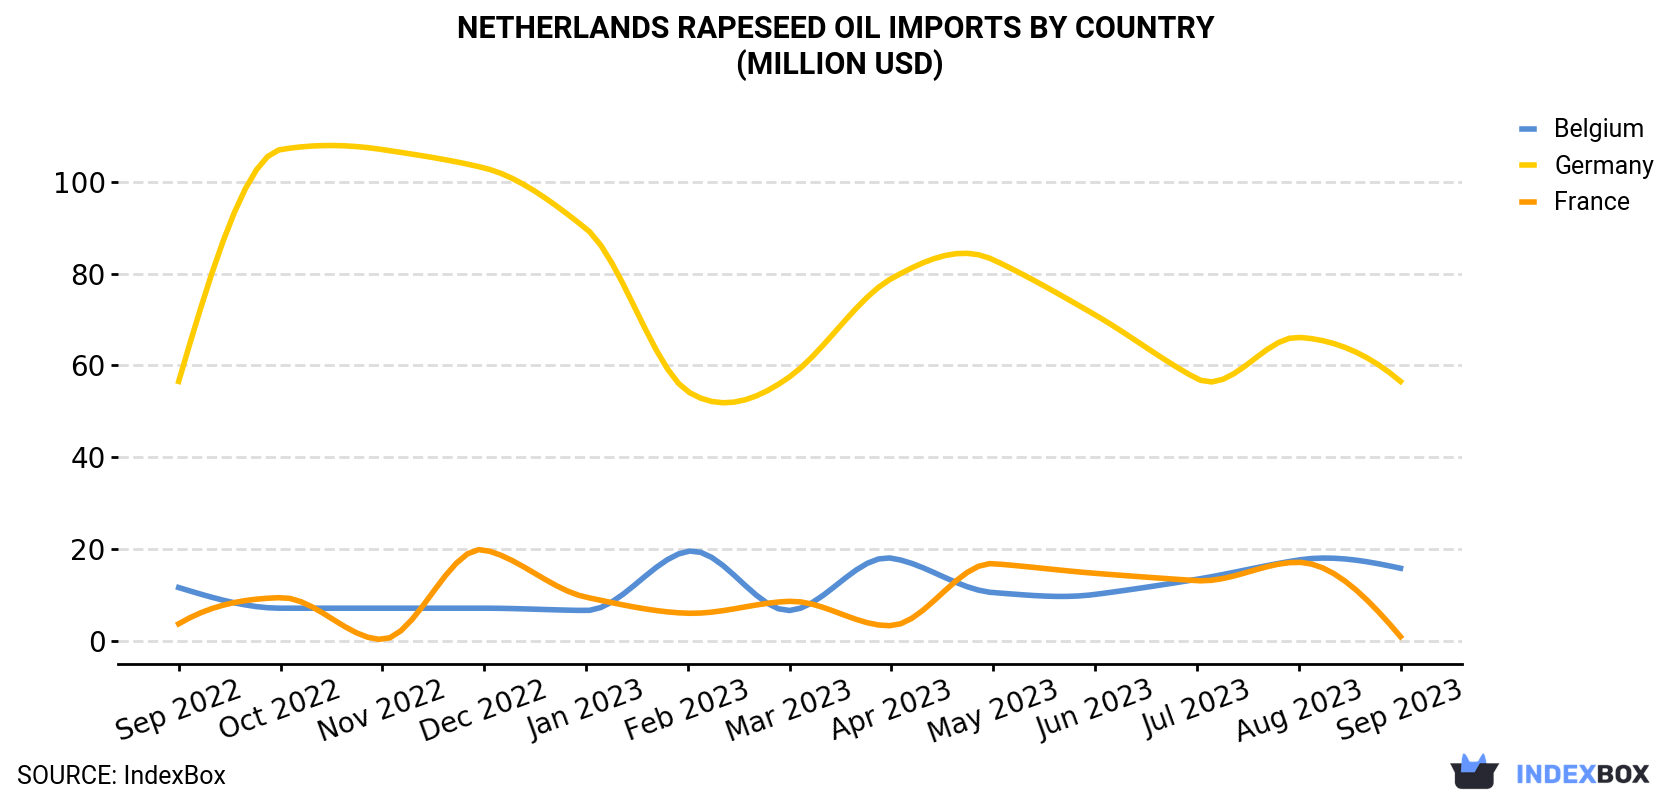 Netherlands Rapeseed Oil Imports By Country (Million USD)